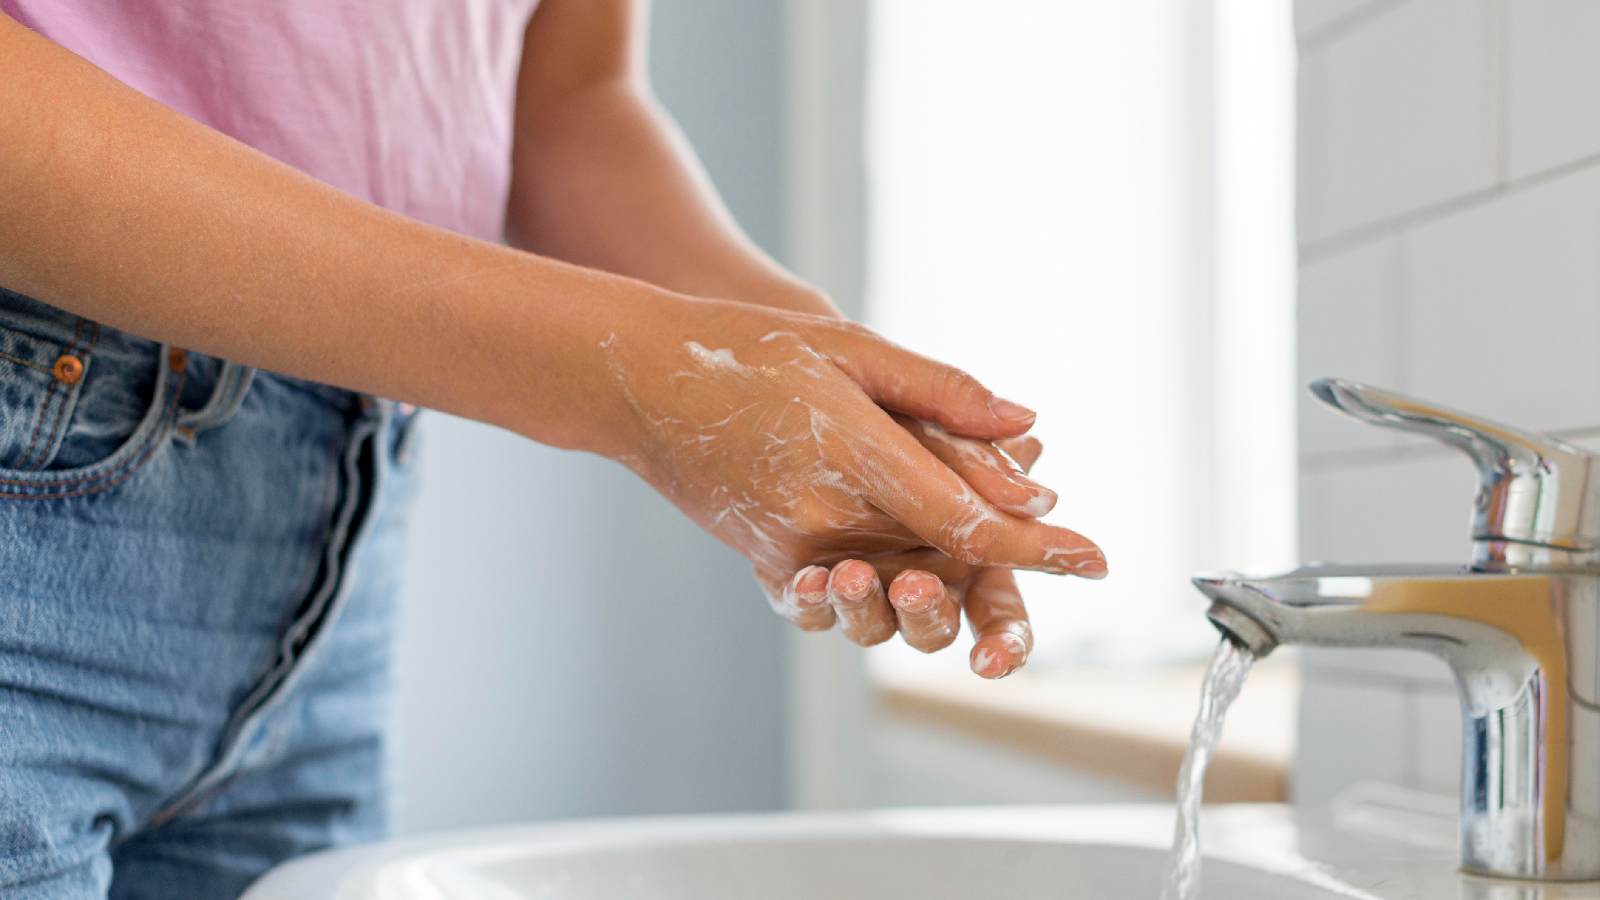 8 Legit Reasons To Wash Your Hands Before Sex 𝐇𝐞𝐚𝐥𝐭𝐡 𝐒𝐤𝐢𝐧 𝐂𝐚𝐫𝐞 𝐁𝐞𝐚𝐮𝐭𝐲 𝐏𝐫𝐨𝐝𝐮𝐜𝐭𝐬